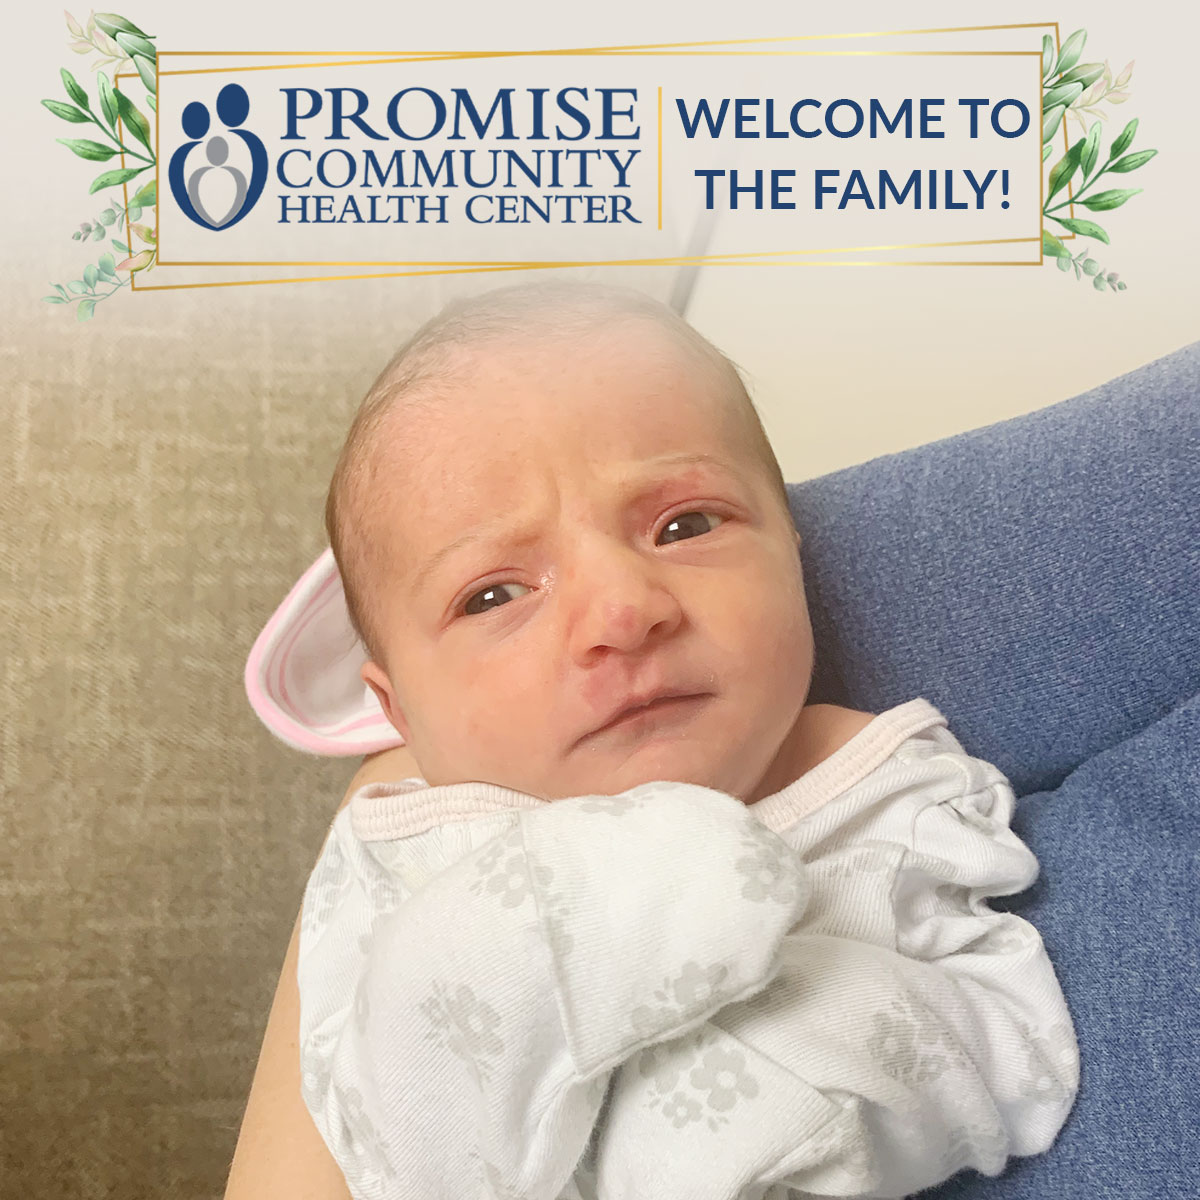 Homebirth in Sioux City, Iowa |Promise Community Health Center in Sioux Center, Iowa | Home births in northwest Iowa, Home births in southeast South Dakota, Home births in southwest Minnesota | Home births in Sioux Falls South Dakota, Home births in Beresford South Dakota, Home births in Sioux City IA, Home births in LeMars IA, Home births in Worthington MN, Home births in Iowa, Home births in South Dakota, Home births in Minnesota